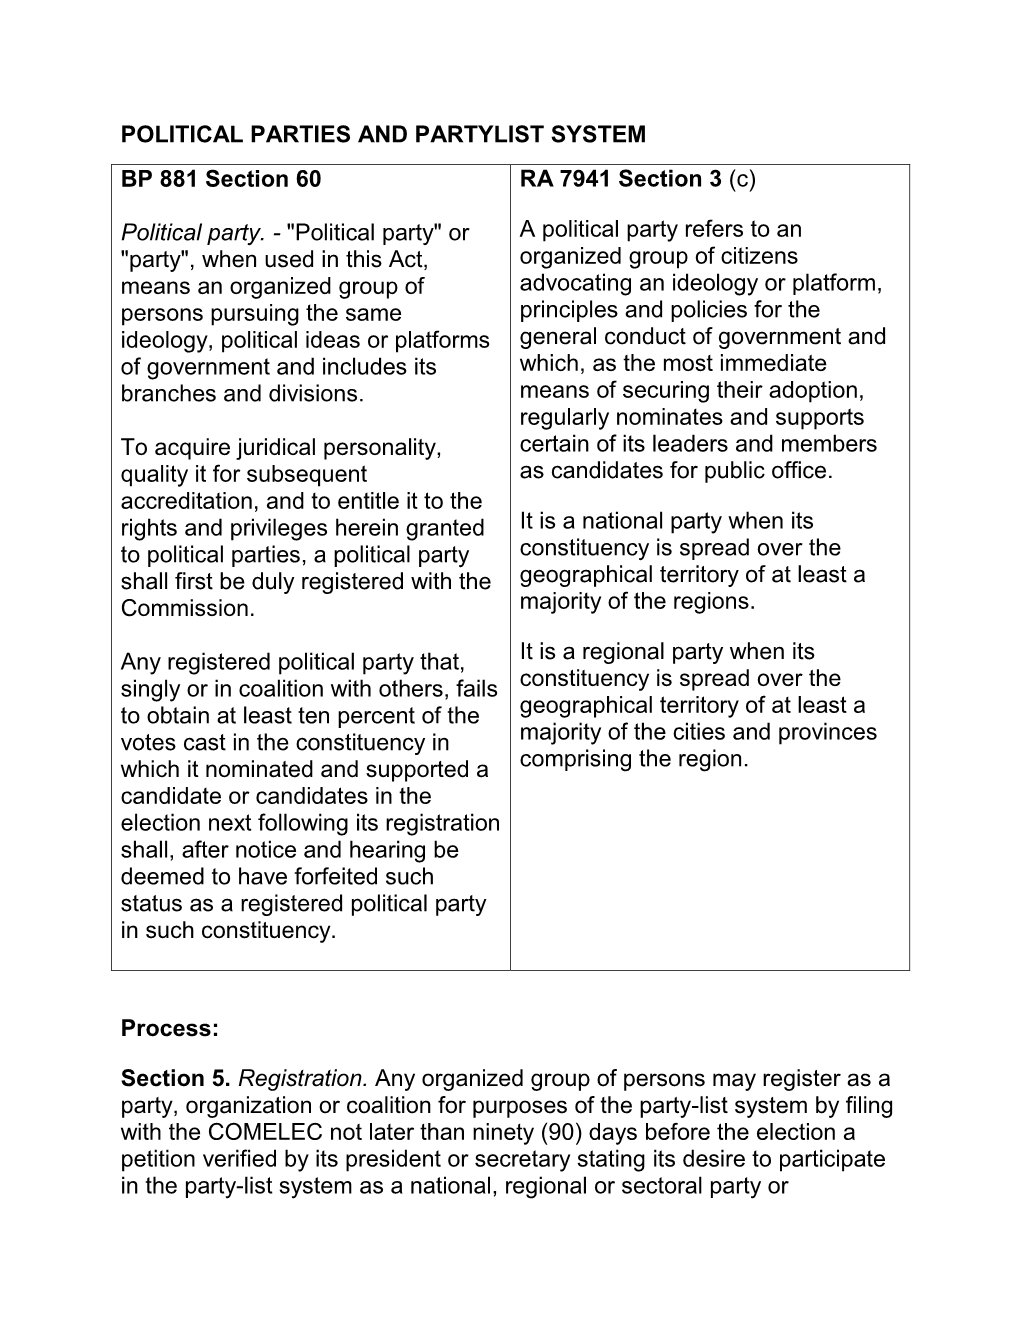 POLITICAL PARTIES and PARTYLIST SYSTEM BP 881 Section 60 RA 7941 Section 3 (C)